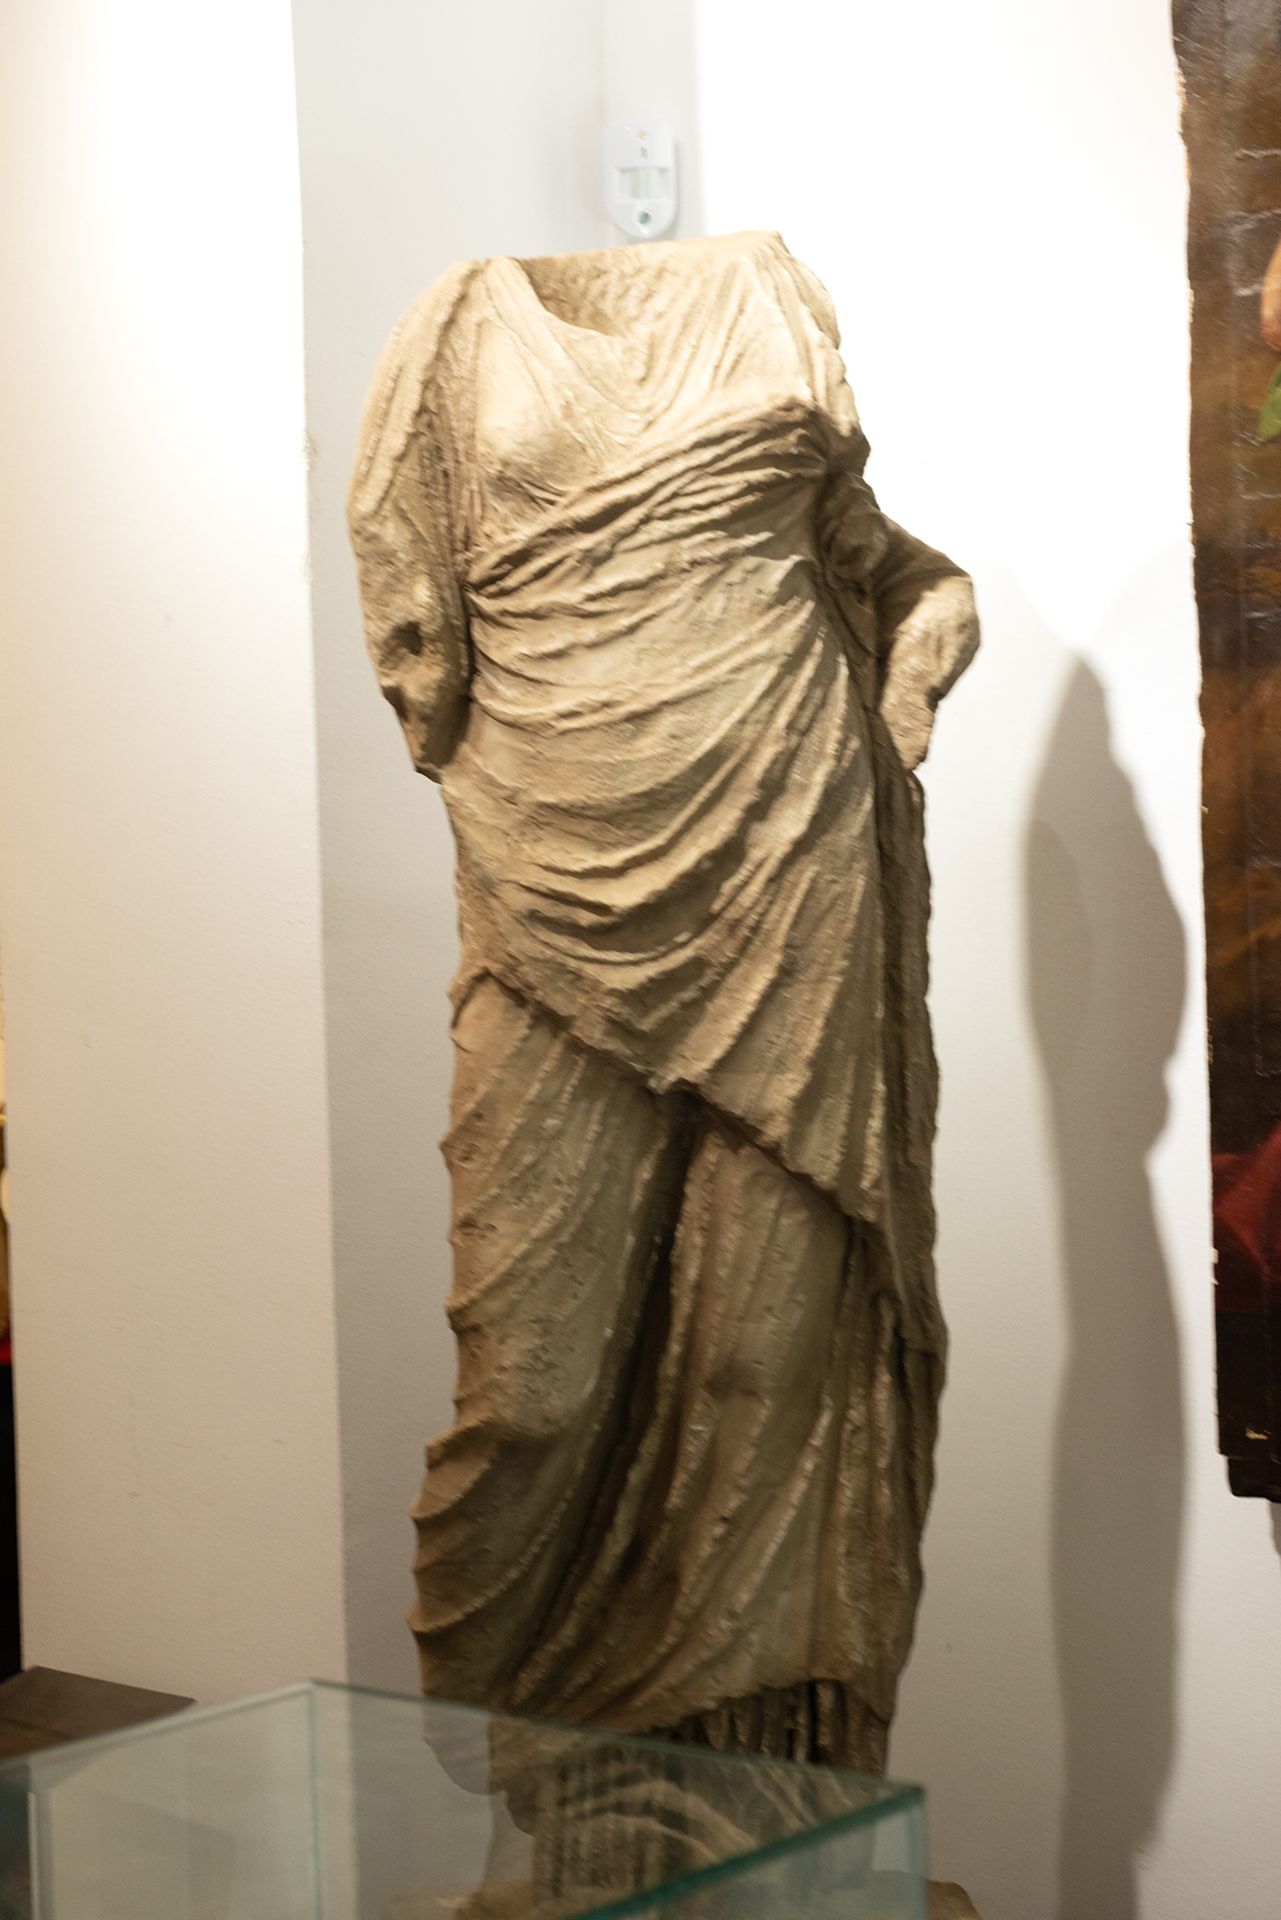 Important Sculpture of Goddess Ceres in Marble Dust, following Roman models from the I - II centurie - Bild 5 aus 11